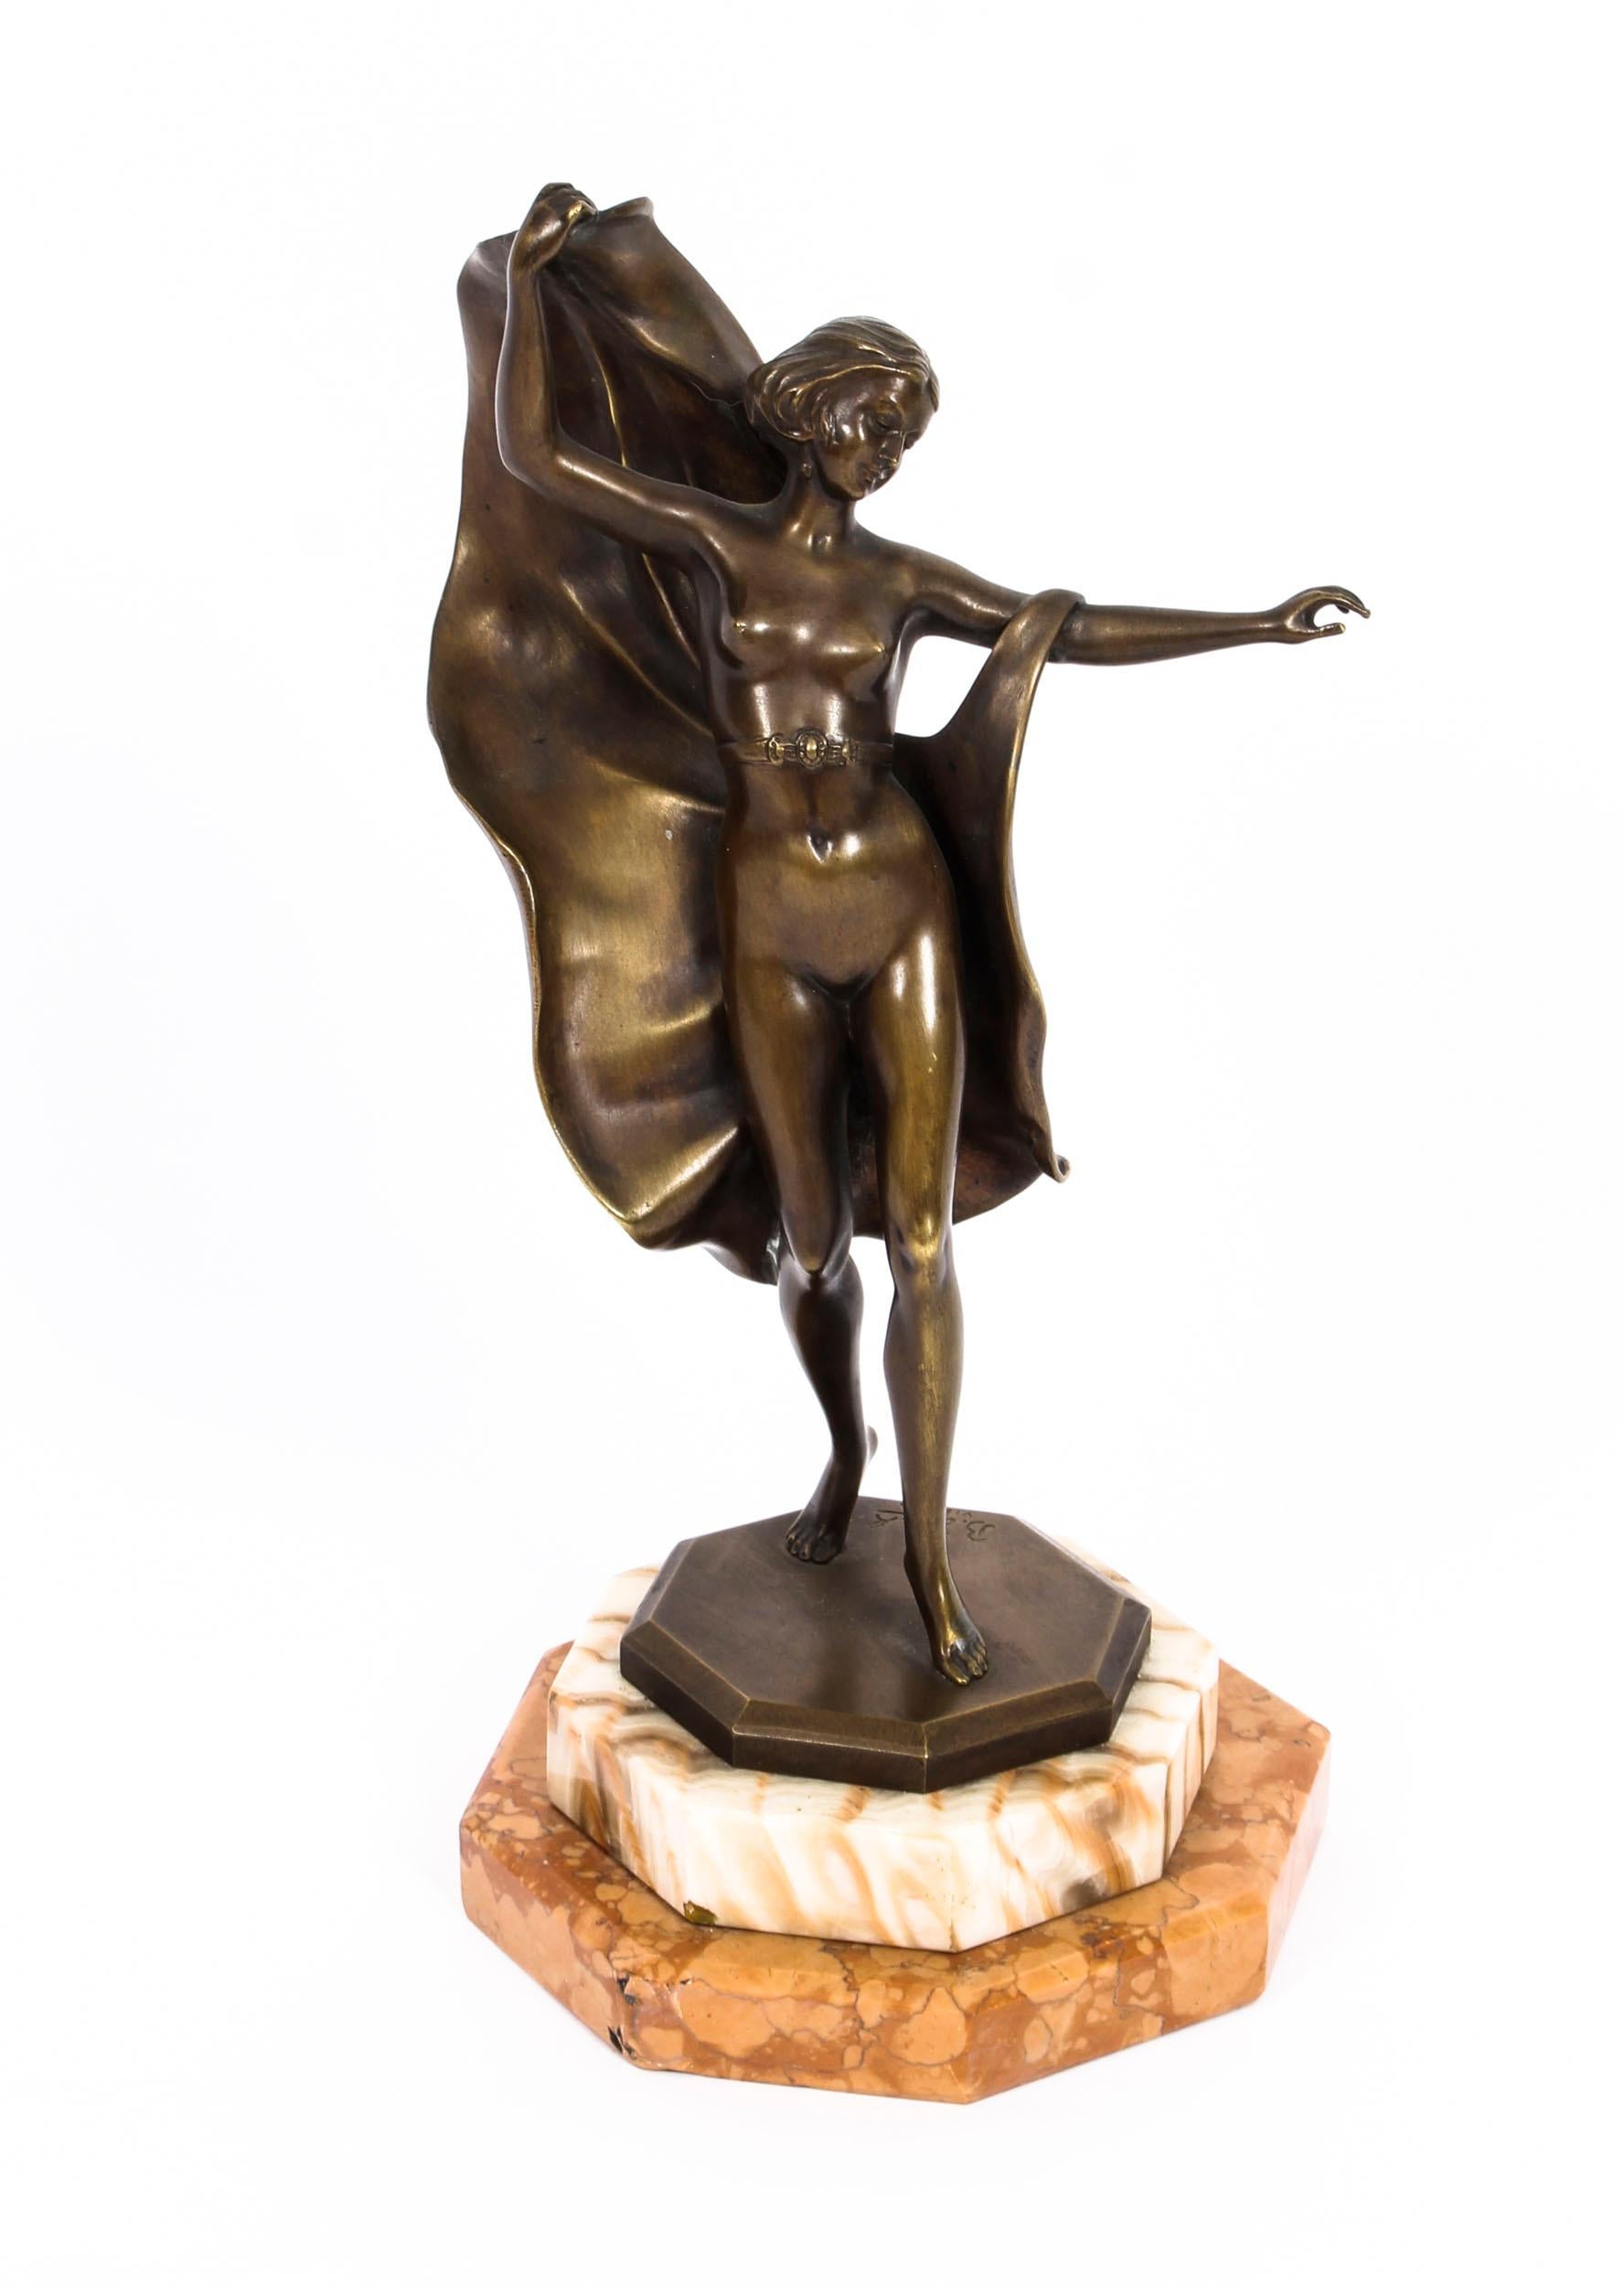 This is a striking antique Viennese Art Deco bronze sculpture of a nude female dancer, by the world-famous Austrian sculptor, Bruno Zach (1891-1935), circa 1920 in date.

This excellently executed patinated bronze sculpture features the remarkable